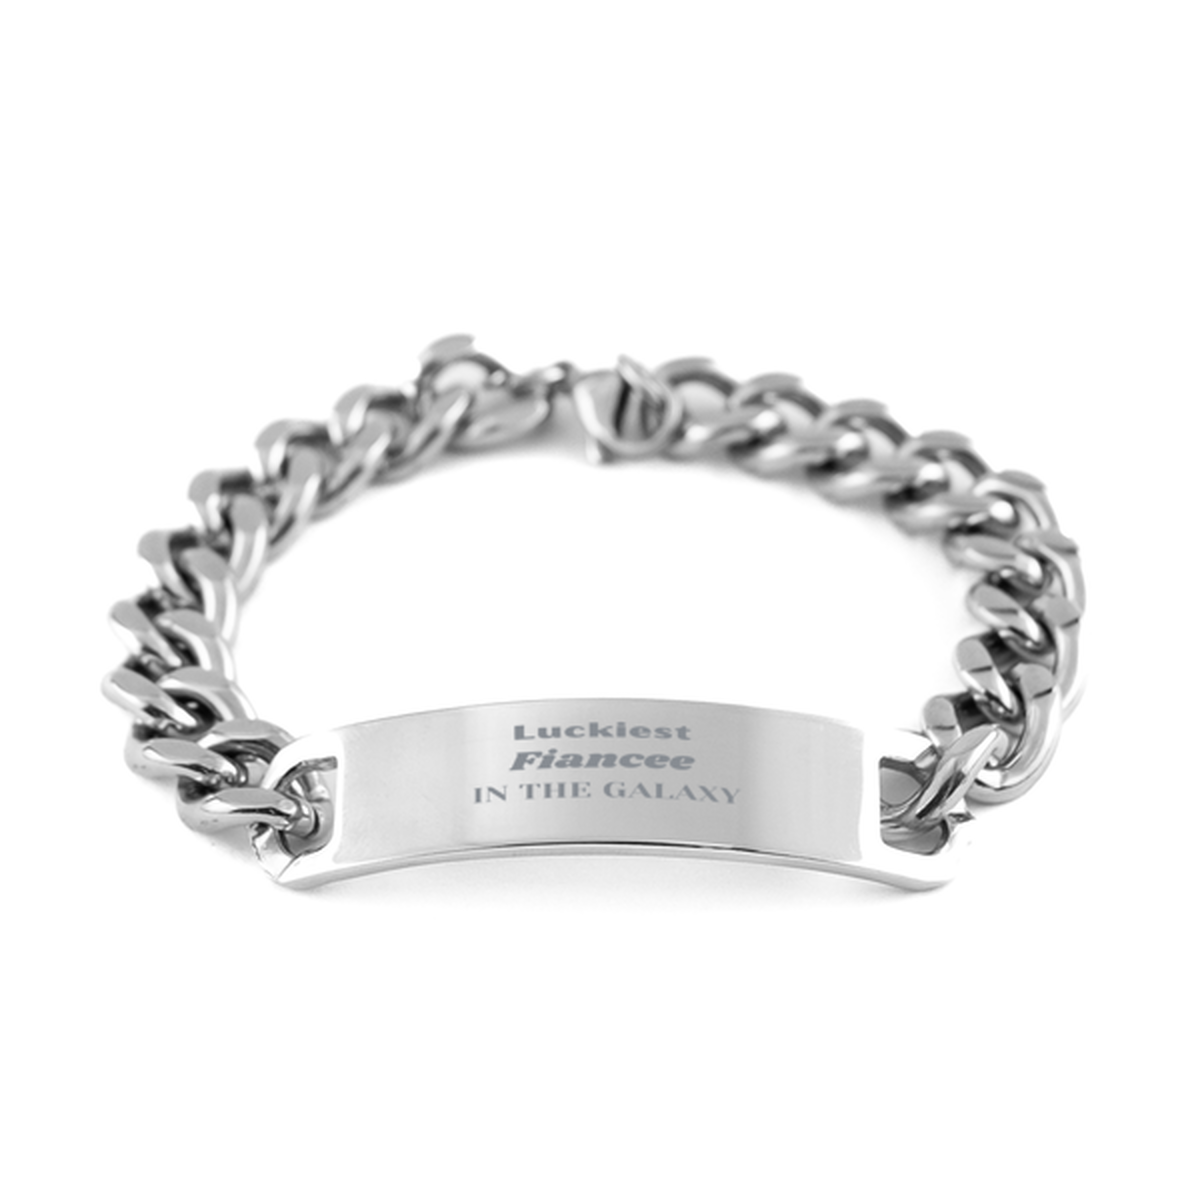 Luckiest Fiancee in the Galaxy, To My Fiancee Engraved Gifts, Christmas Fiancee Cuban Chain Stainless Steel Bracelet Gifts, X-mas Birthday Unique Gifts For Fiancee Men Women